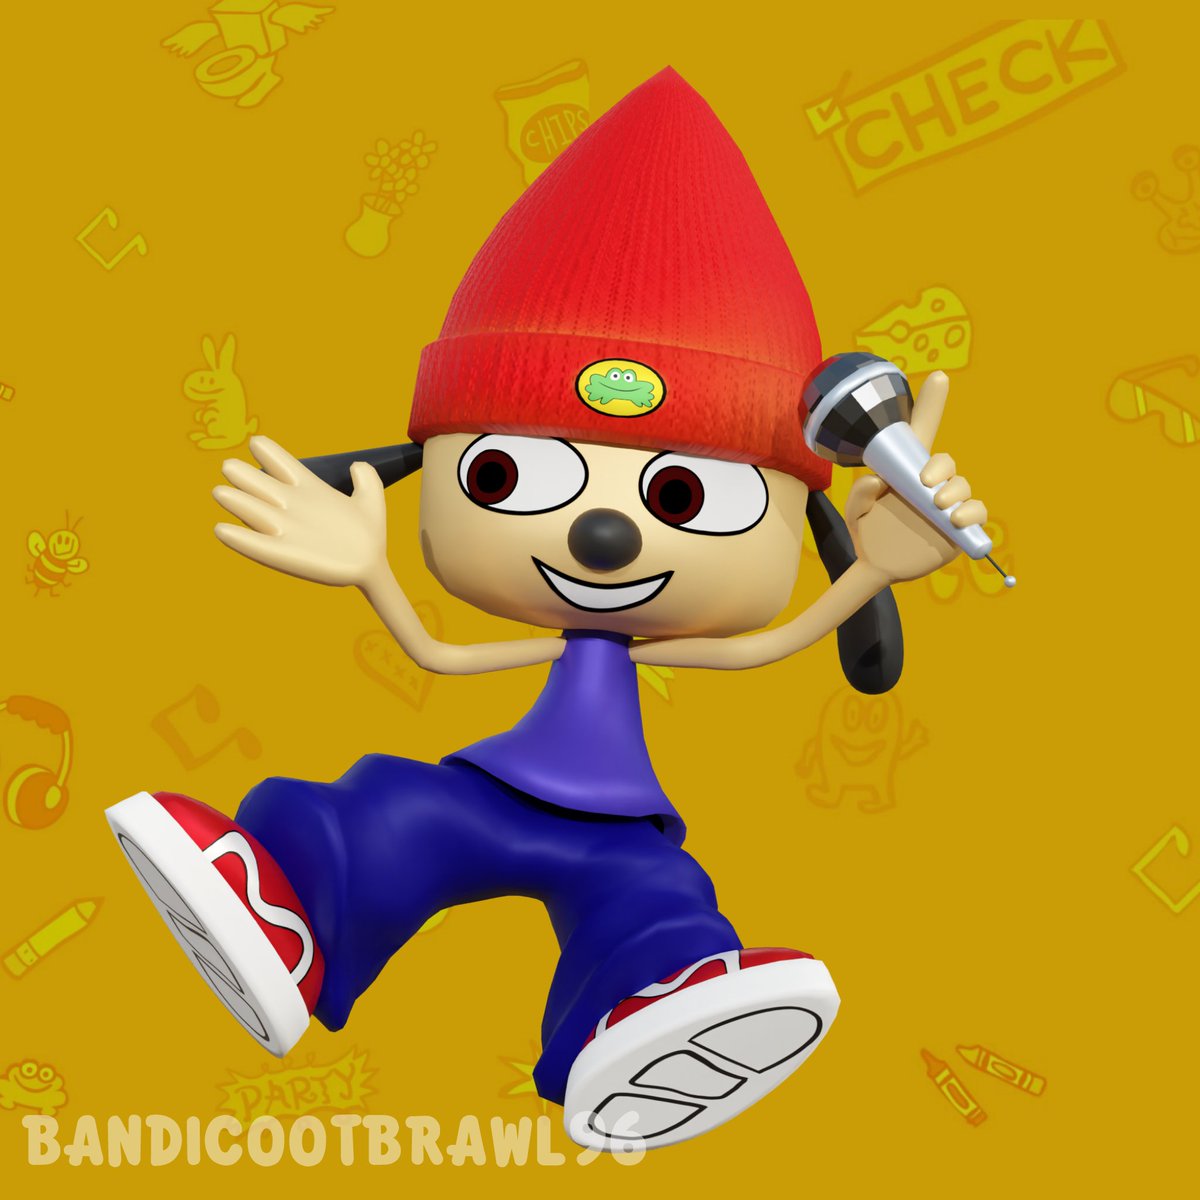 Parappa the Rapper
'Yeah, I know, I gotta believe!'
Colors are based on his in game palette
Parappa is awesome 
#ParappaTheRapper #3d #b3d